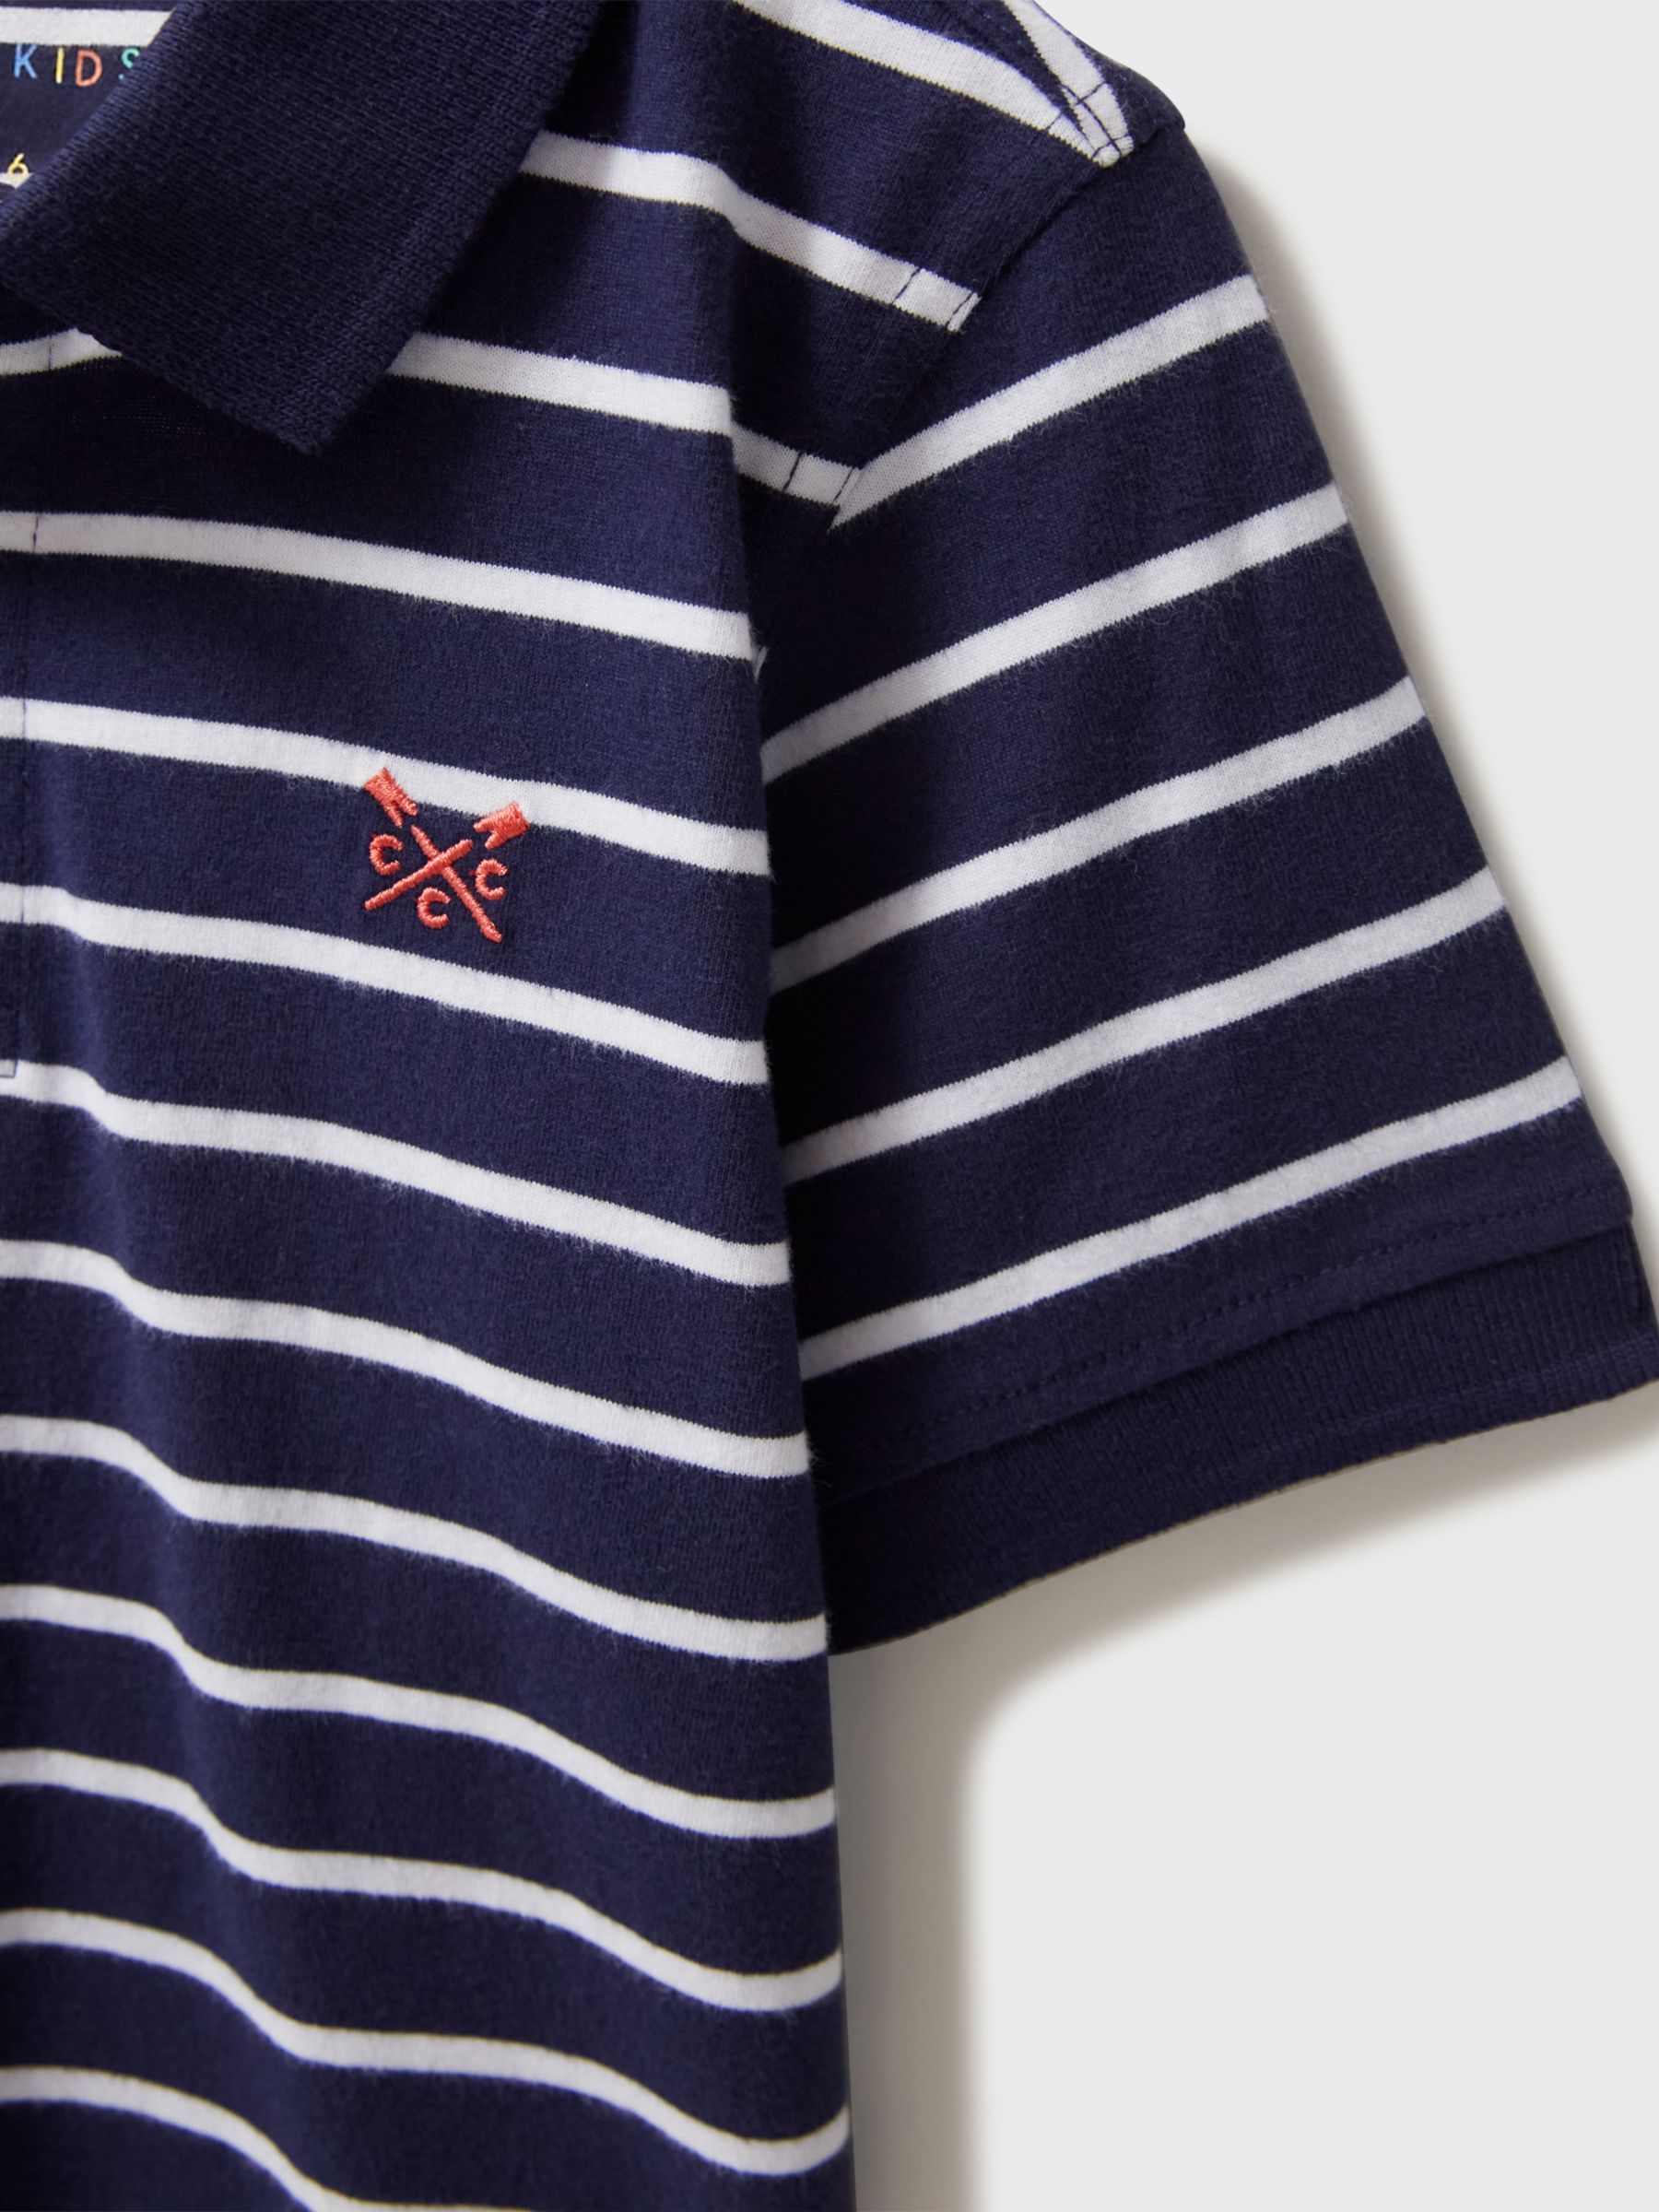 Crew Clothing Kids' Striped Pique Short Sleeved Polo Shirt, Navy/White, 11-12 years